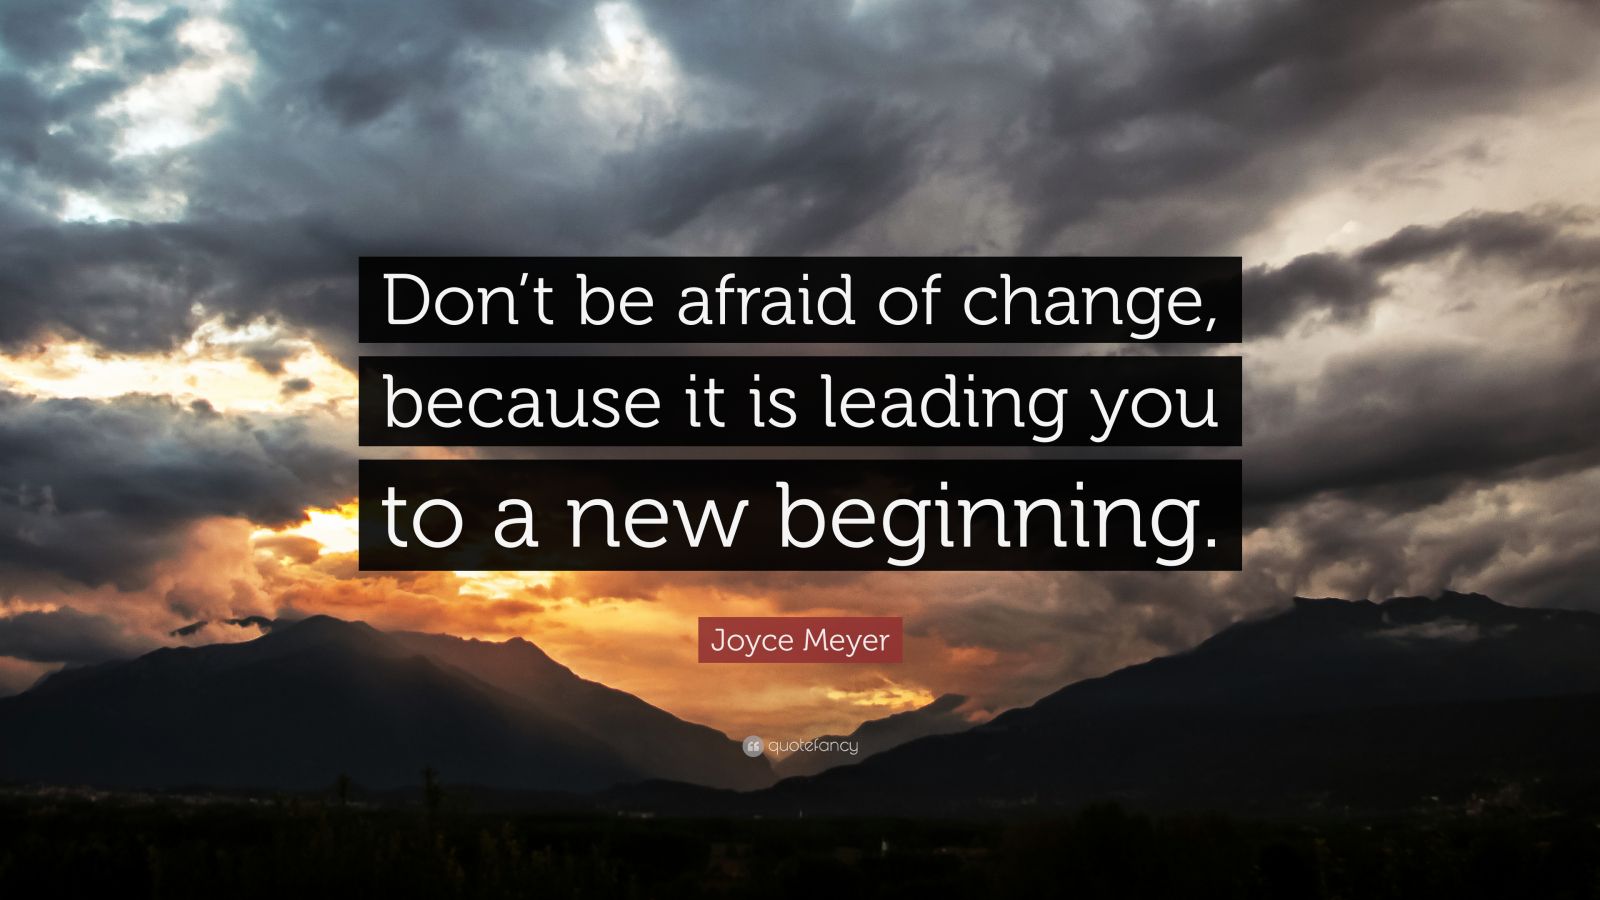 Joyce Meyer Quote: “Don’t be afraid of change, because it is leading ...